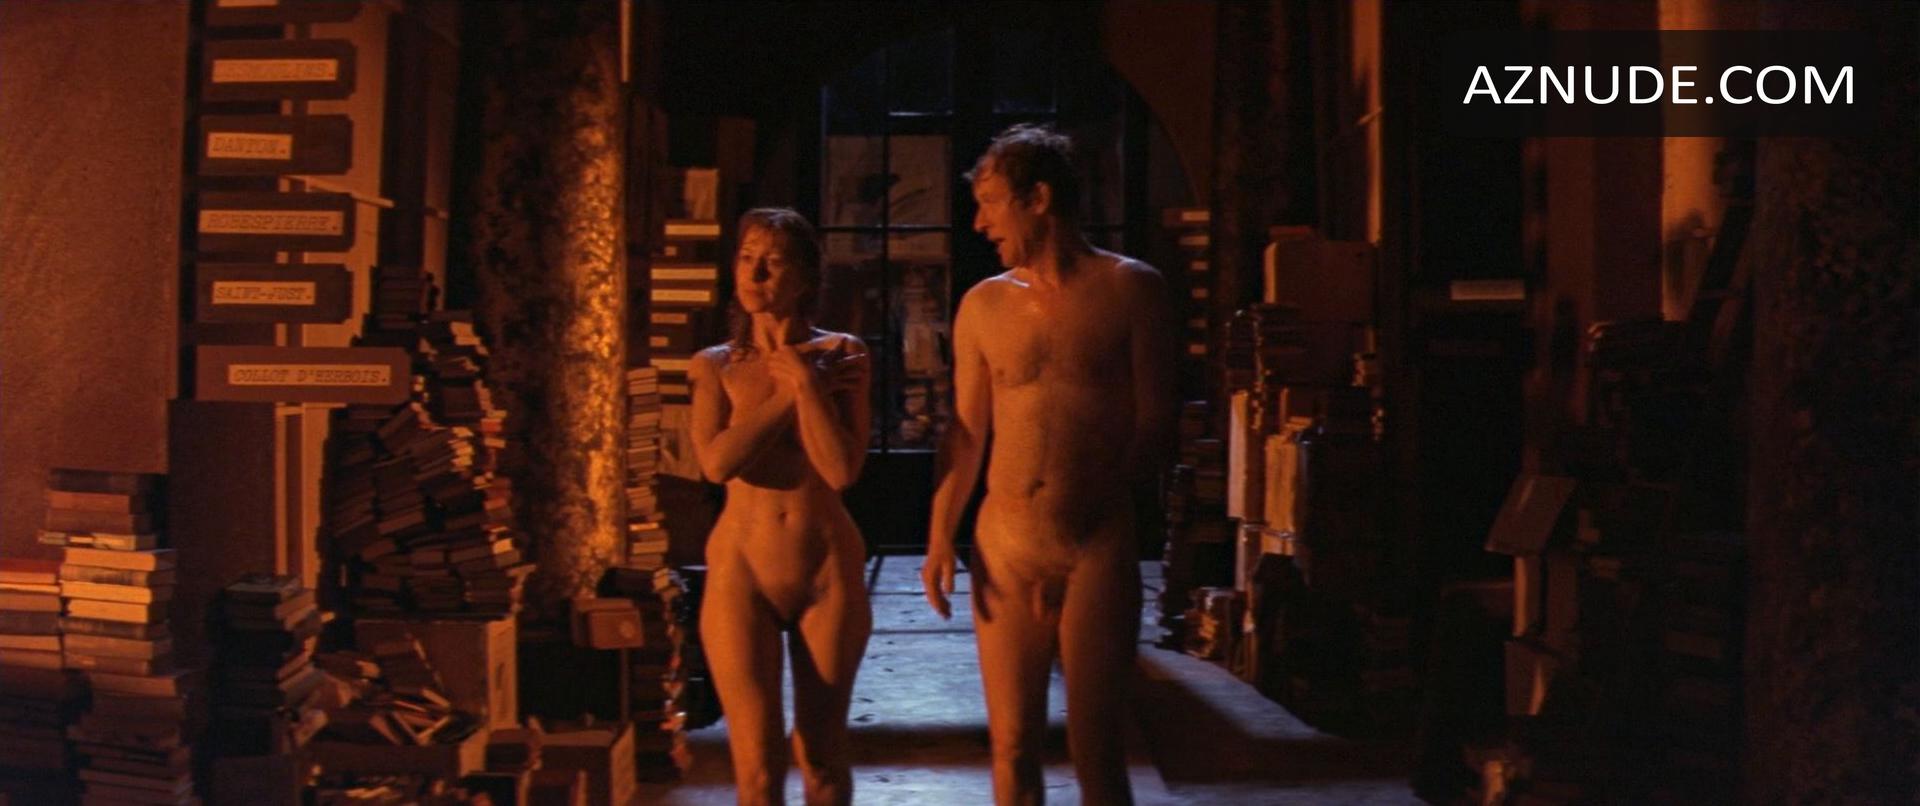 The Cook The Thief His Wife And Her Lover Nude Scenes Aznude 